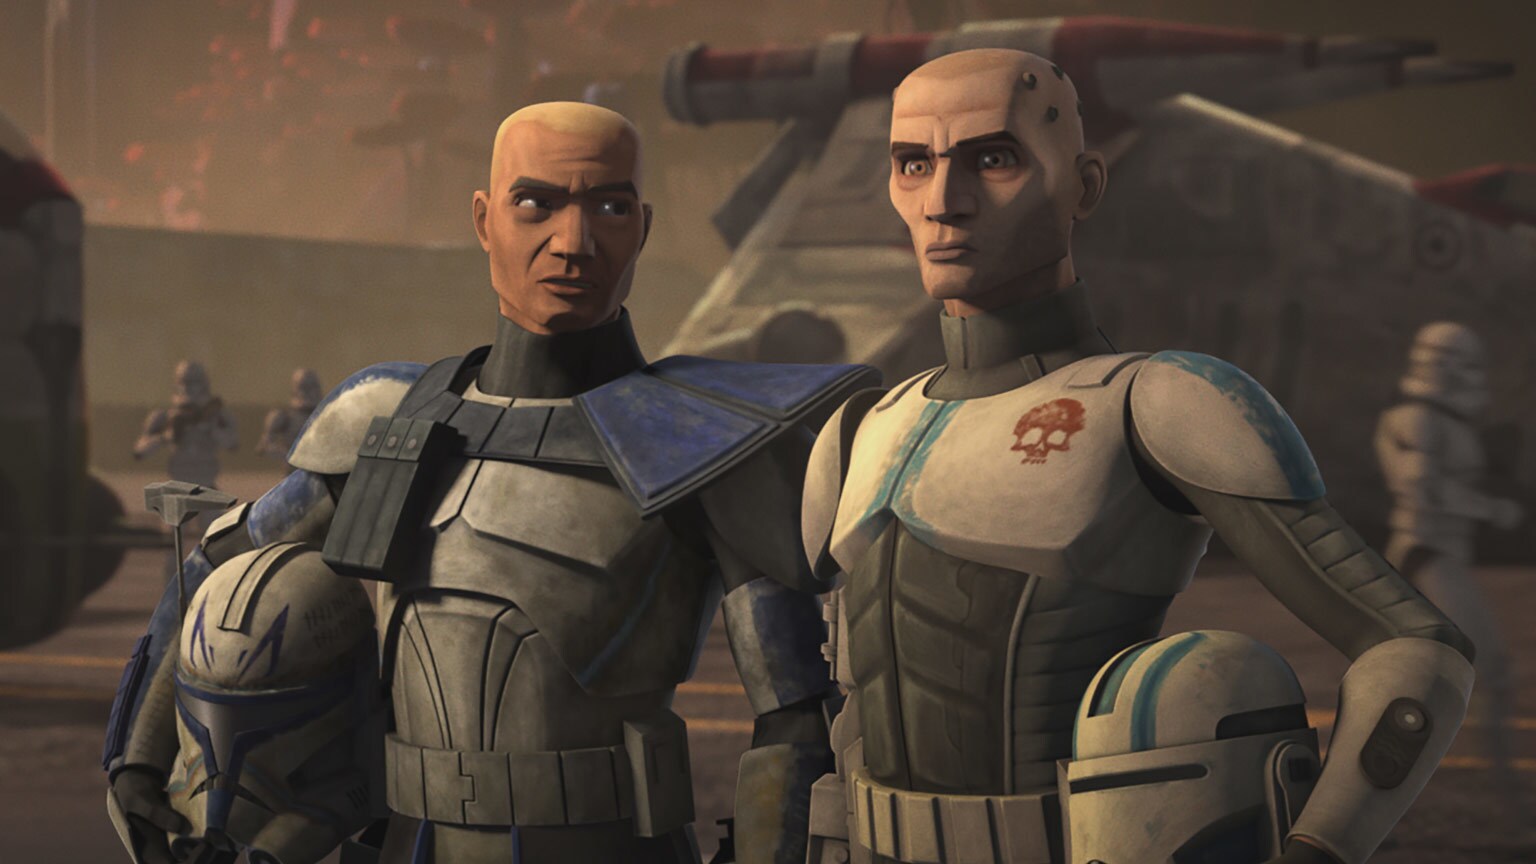 The Clone Wars Rewatch: Echo's "Unfinished Business"